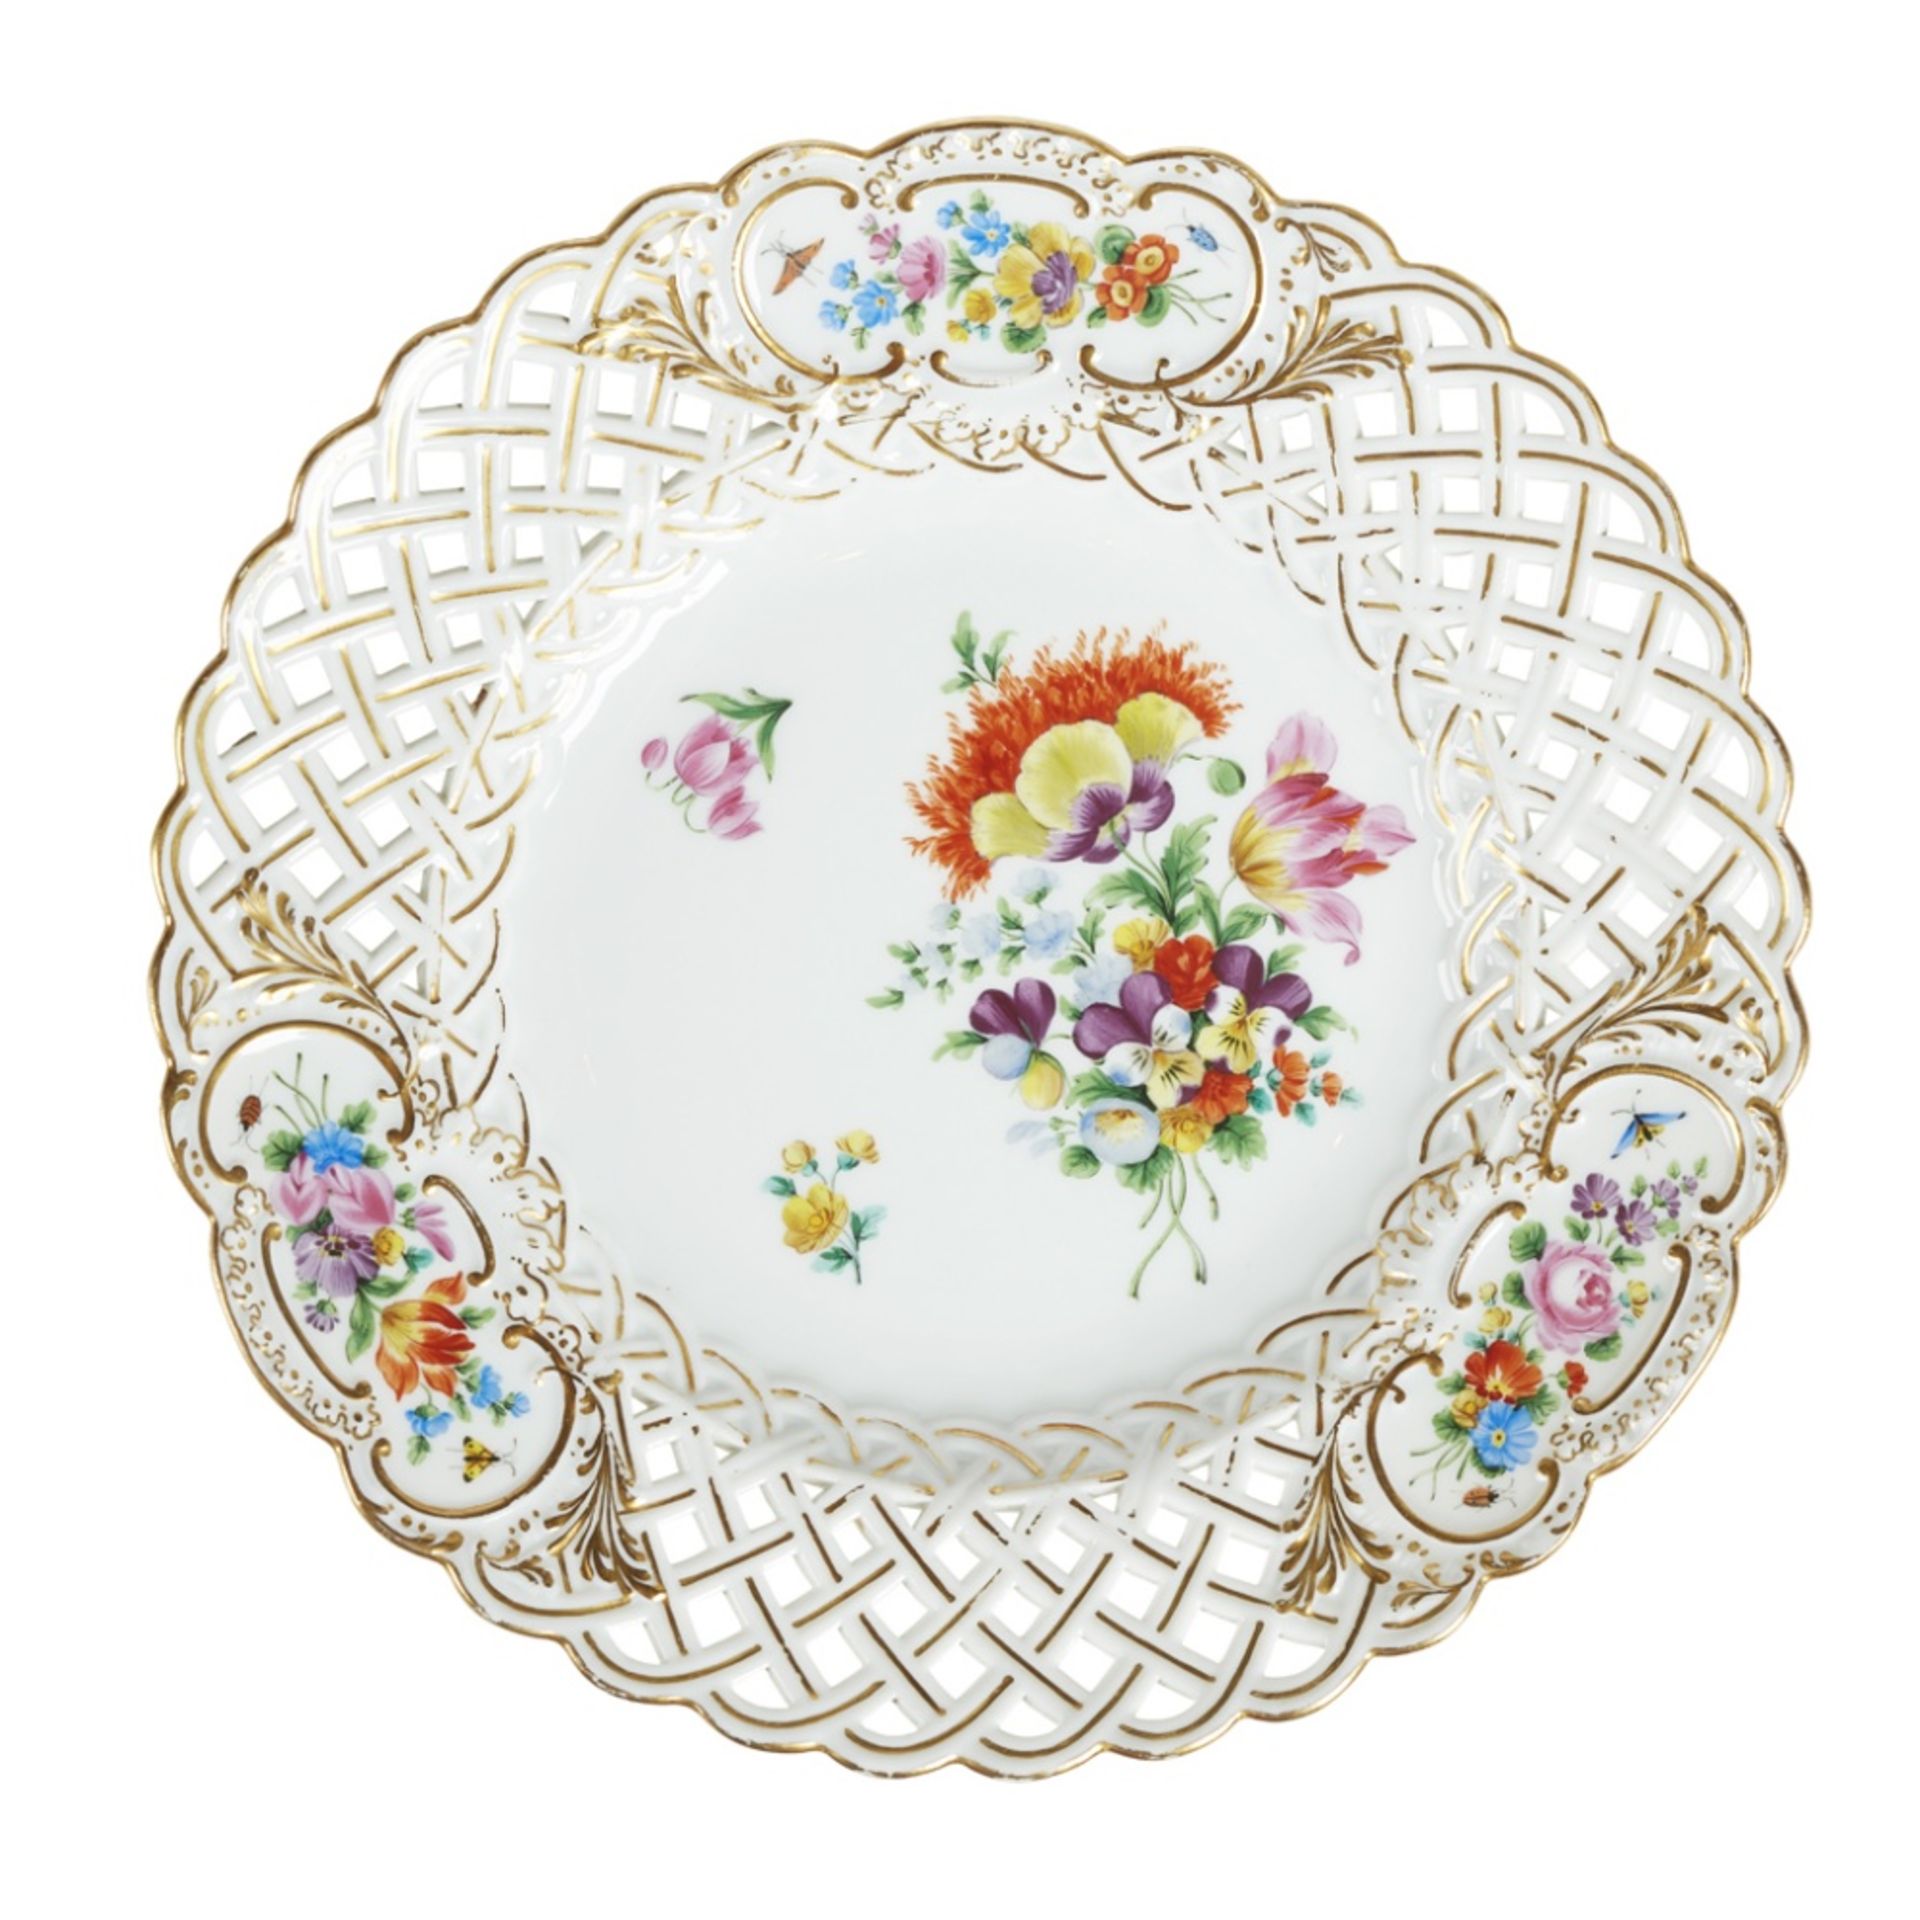 ASSEMBLED MEISSEN PORCELAIN PART DESSERT SERVICELATE 19TH/ EARLY 20TH CENTURY painted with flower - Image 2 of 2